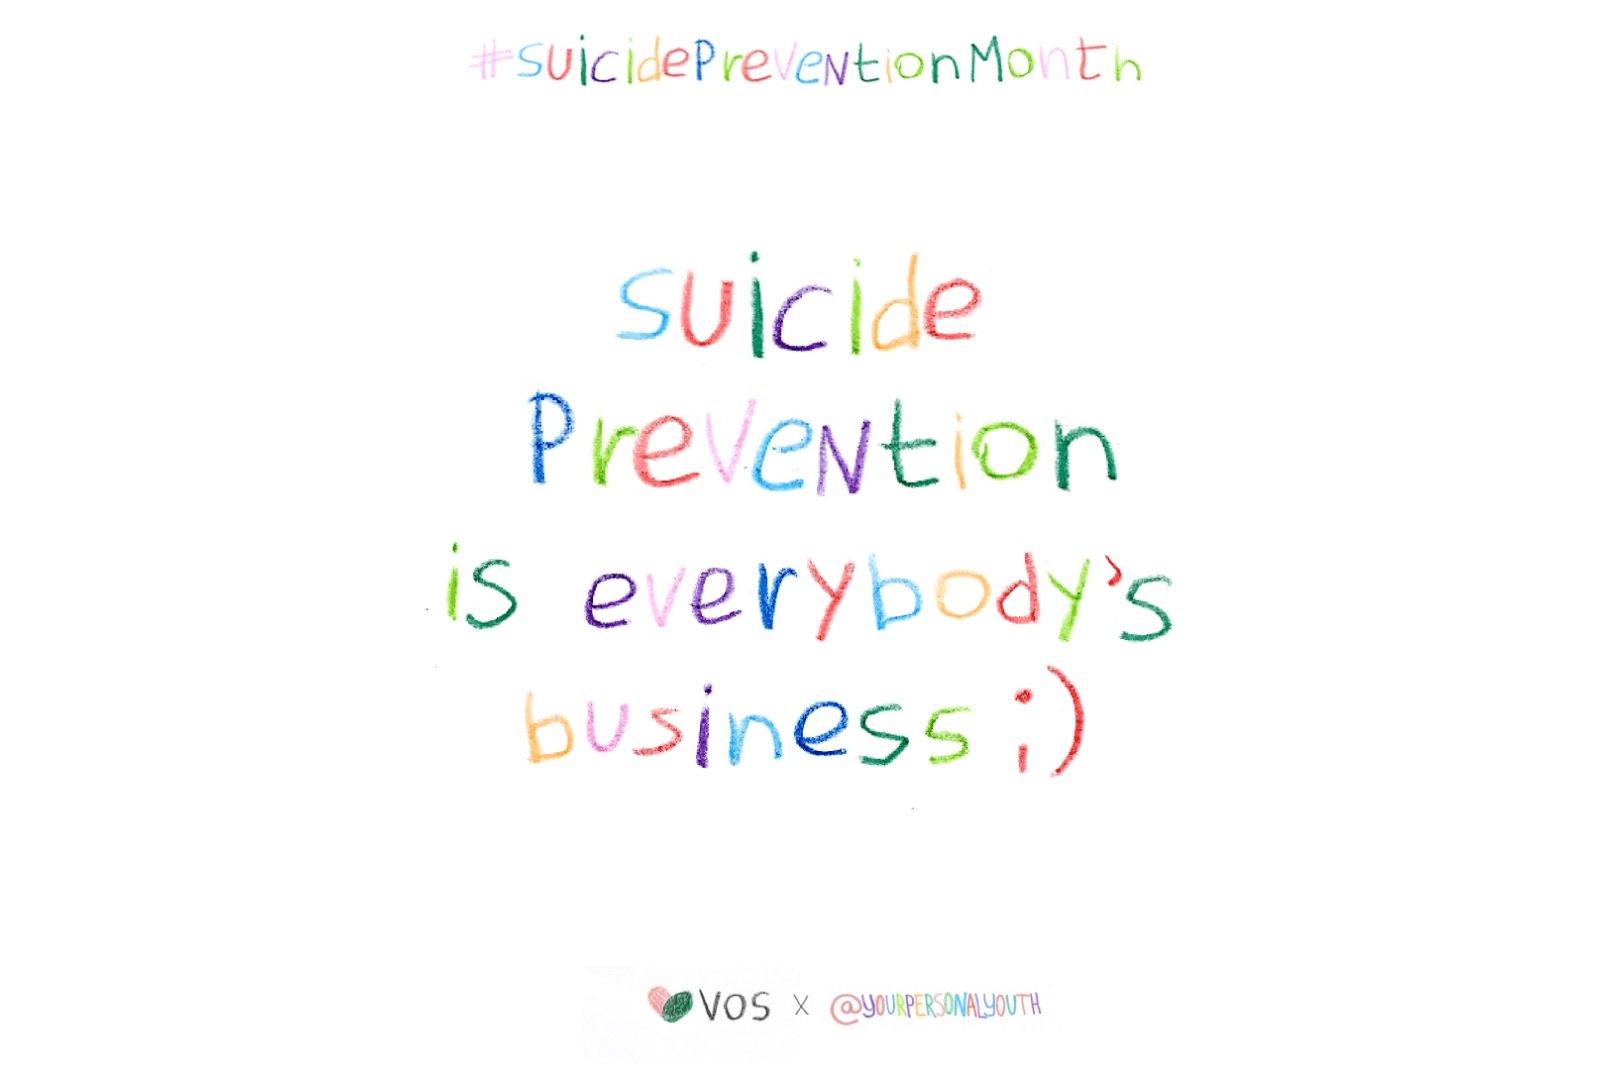 Suicide Is Everybody's Business